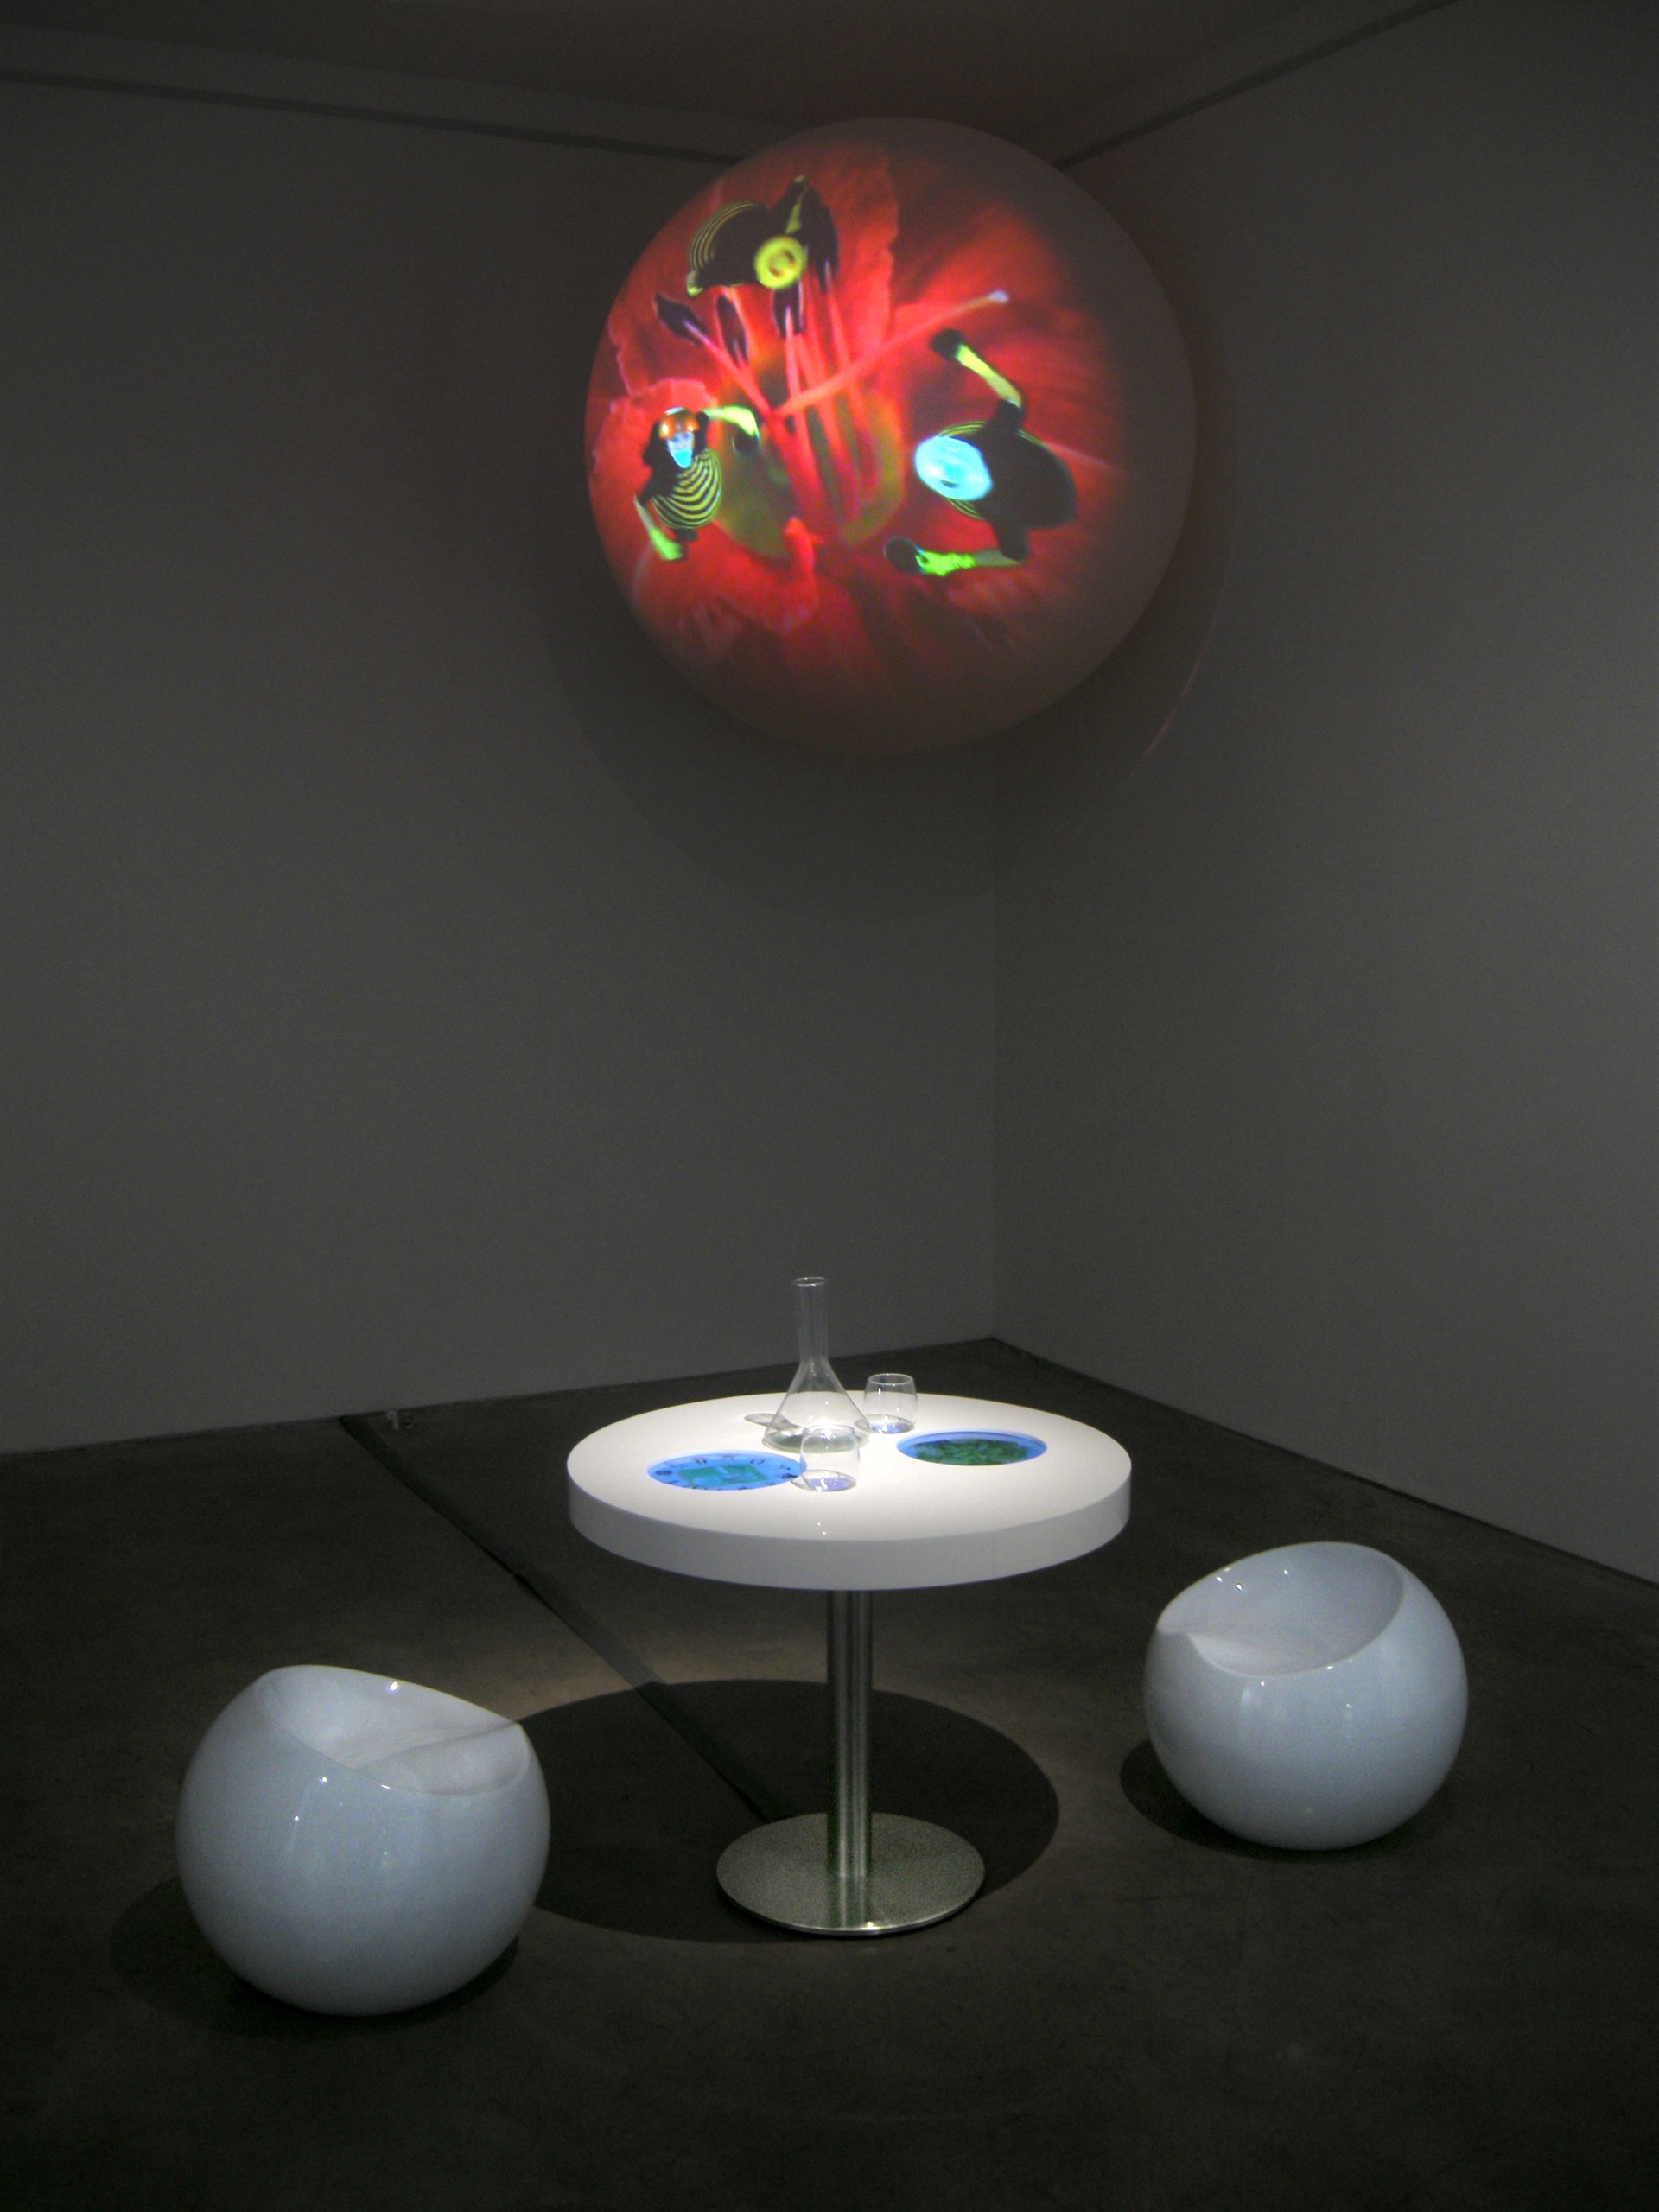 Last Supper (table) and Bee Planet (sphere) by Katja Loher